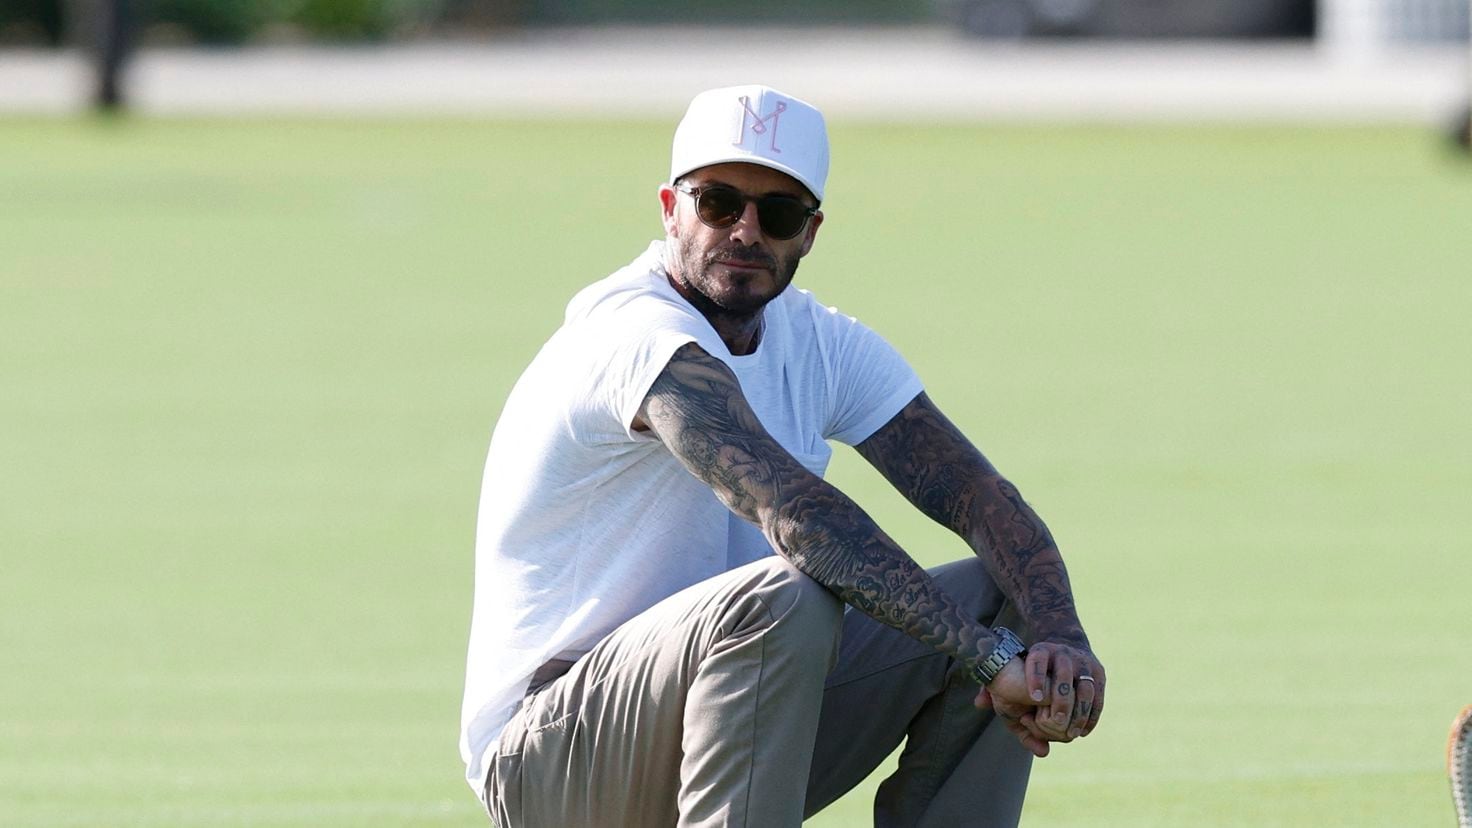 Video of David Beckham recreating Messi’s free kick goal in his first match with Inter Miami